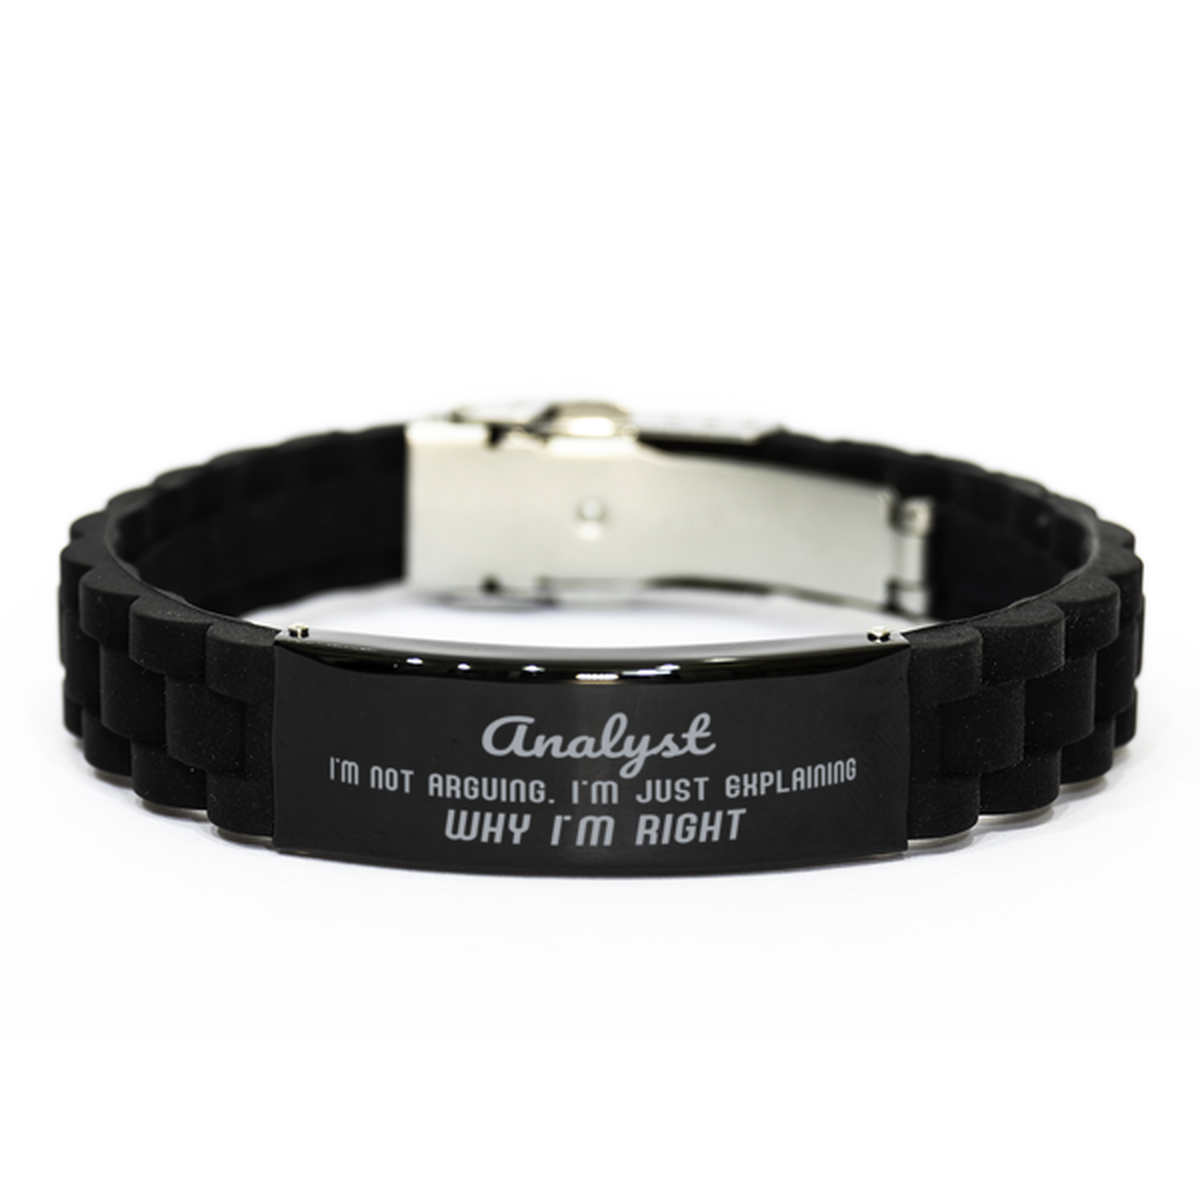 Analyst I'm not Arguing. I'm Just Explaining Why I'm RIGHT Black Glidelock Clasp Bracelet, Funny Saying Quote Analyst Gifts For Analyst Graduation Birthday Christmas Gifts for Men Women Coworker